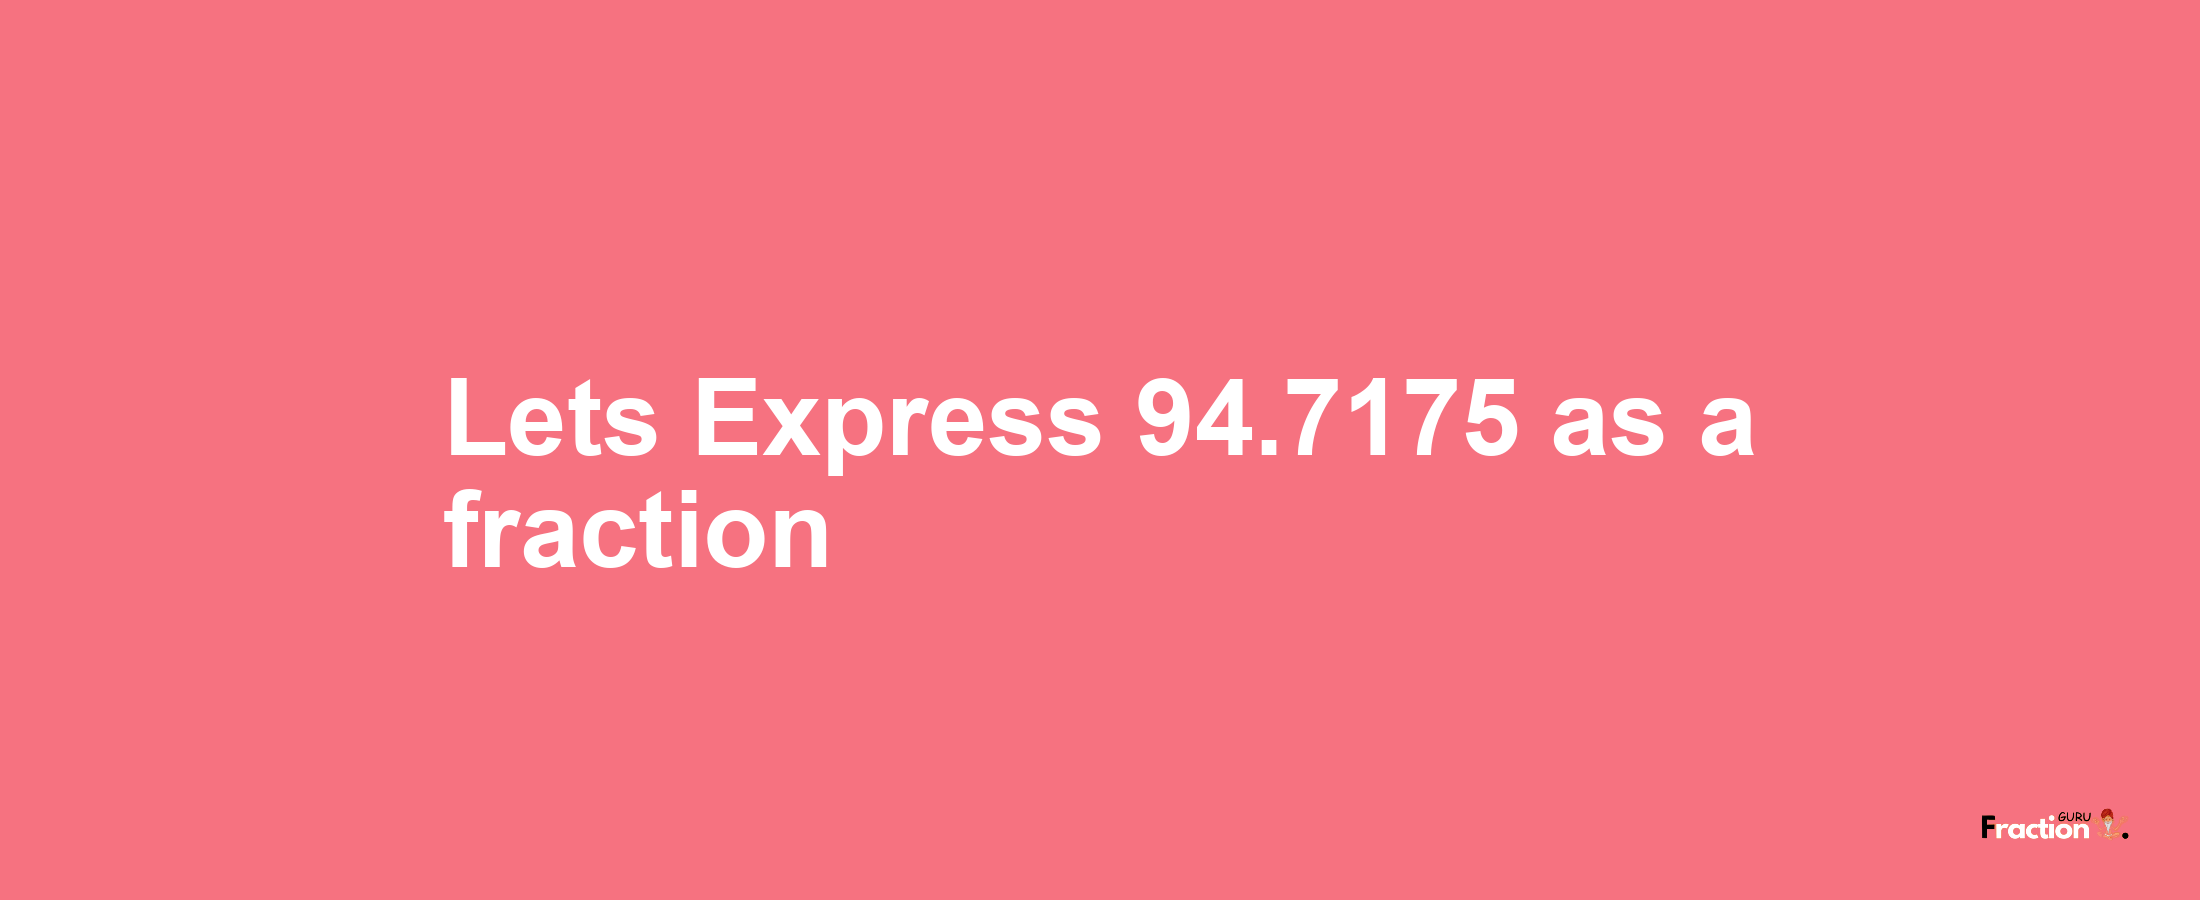 Lets Express 94.7175 as afraction